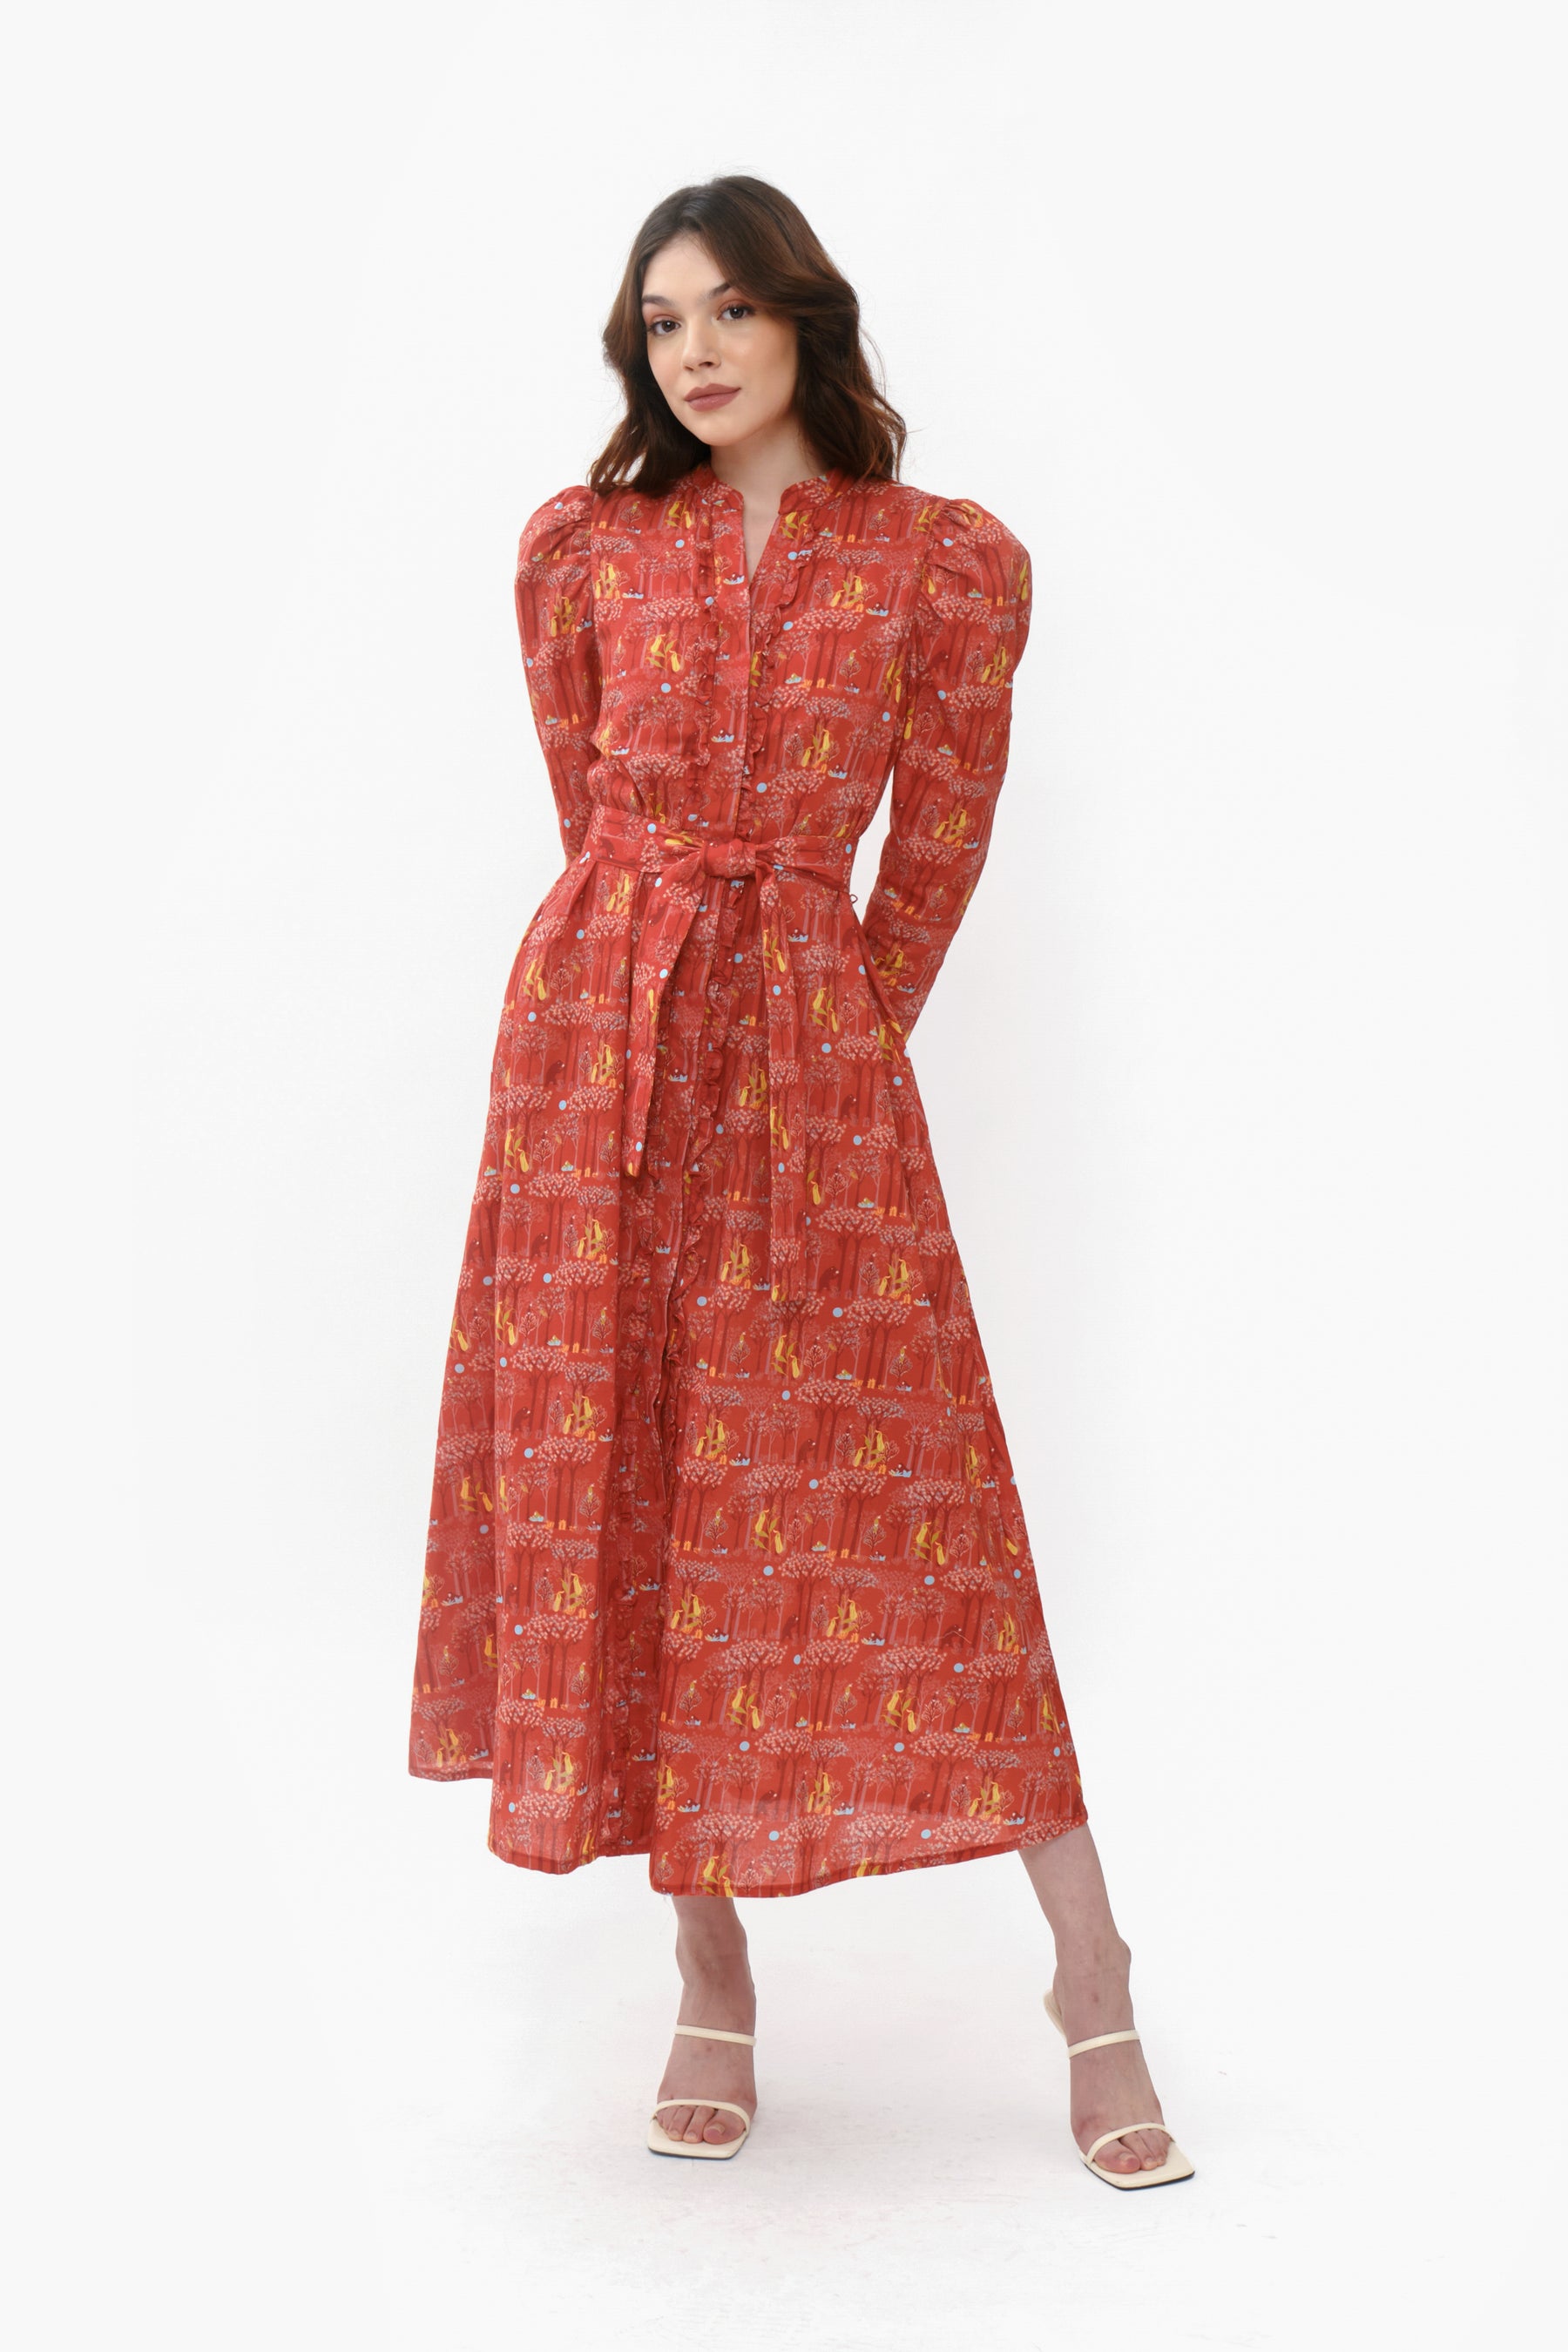 NALA Dress in Red Forest